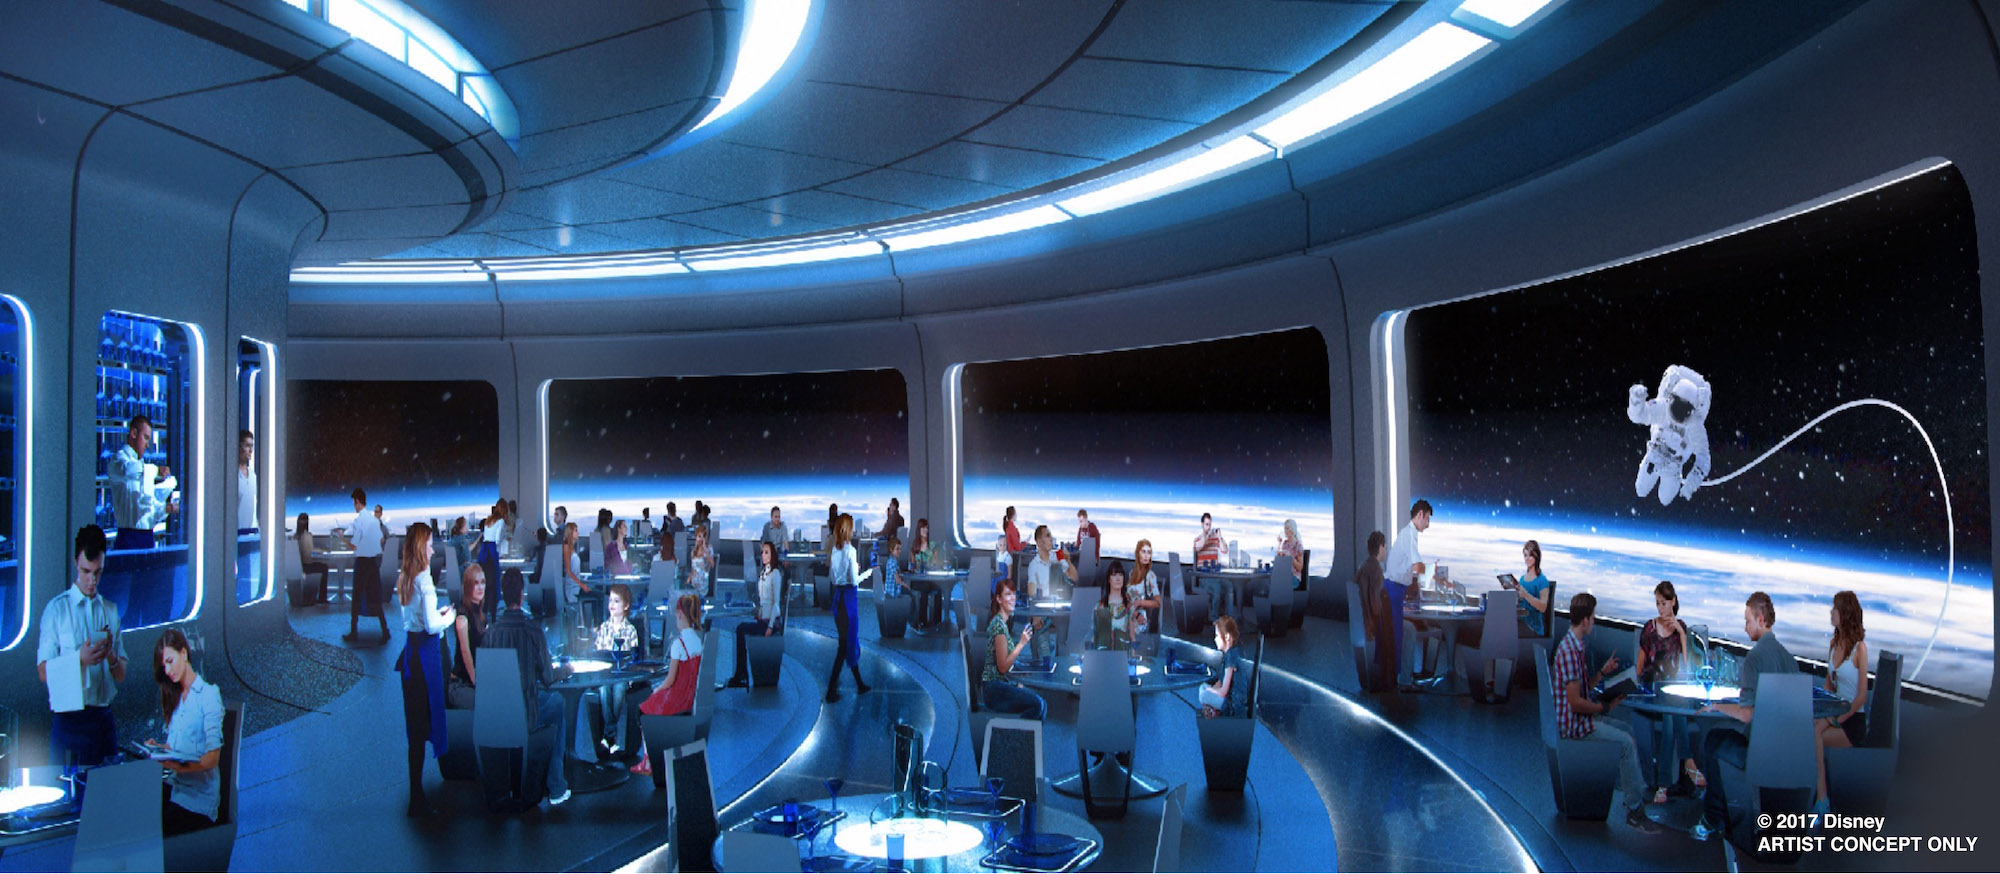 New Space Restaurant to Offer ‘Out-of-this-World’ Dining Experience at Epcot